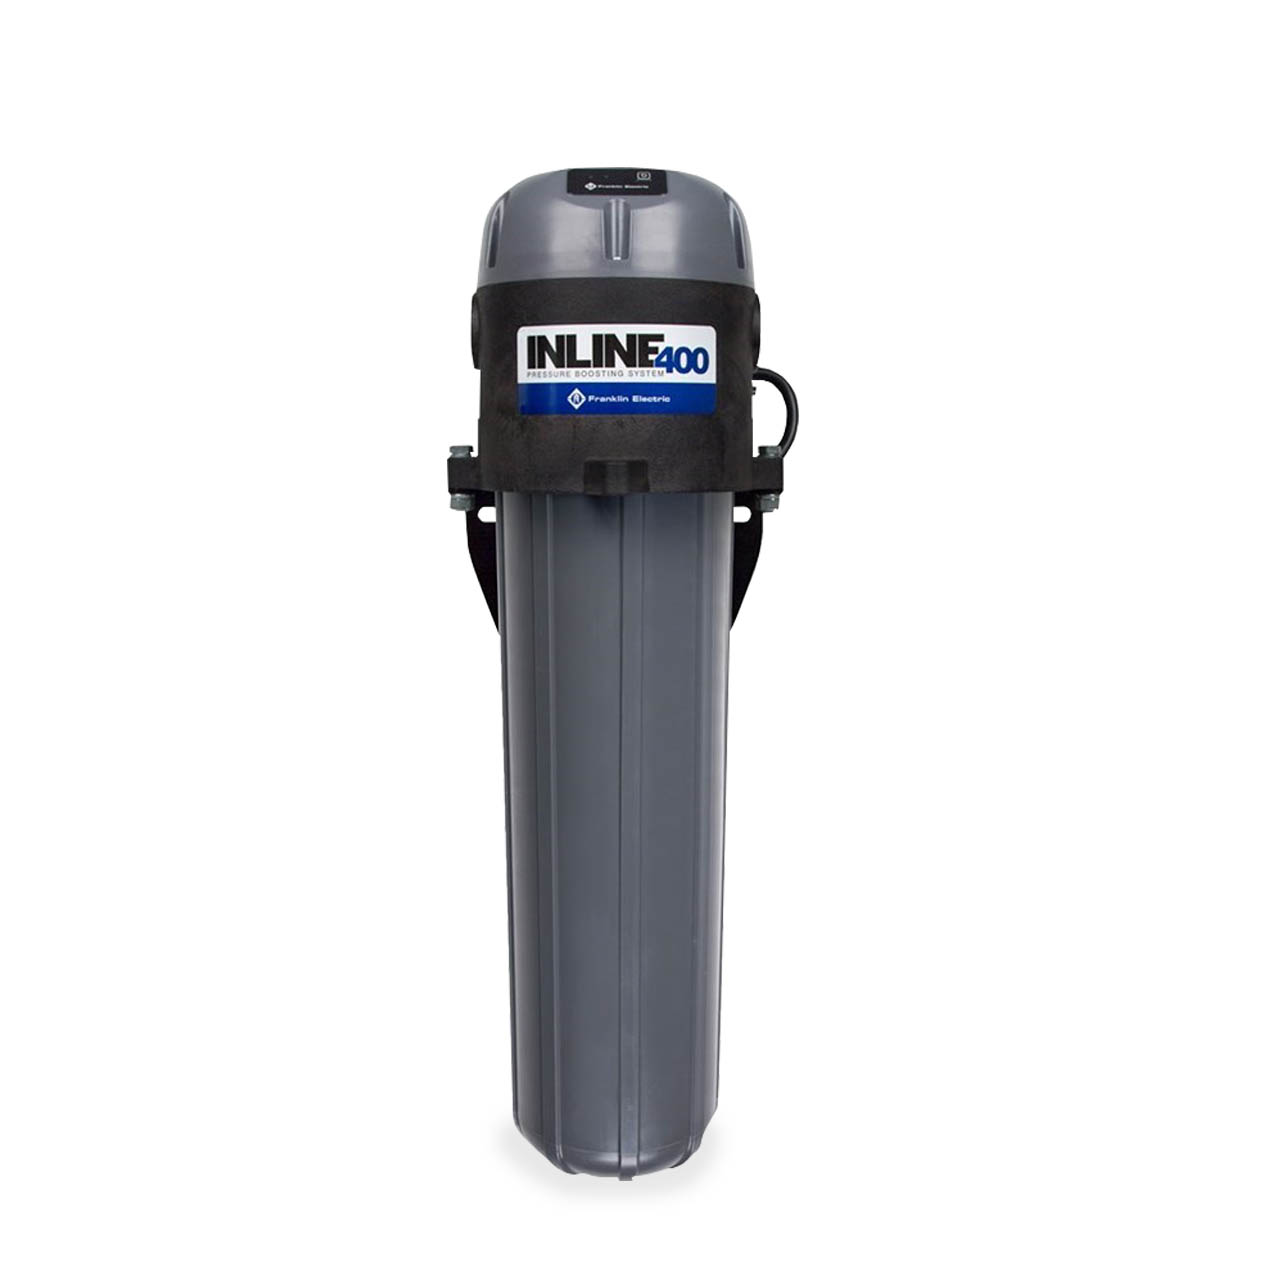 PowerFLO Home Booster Pump - Automatic Water Pressure Booster